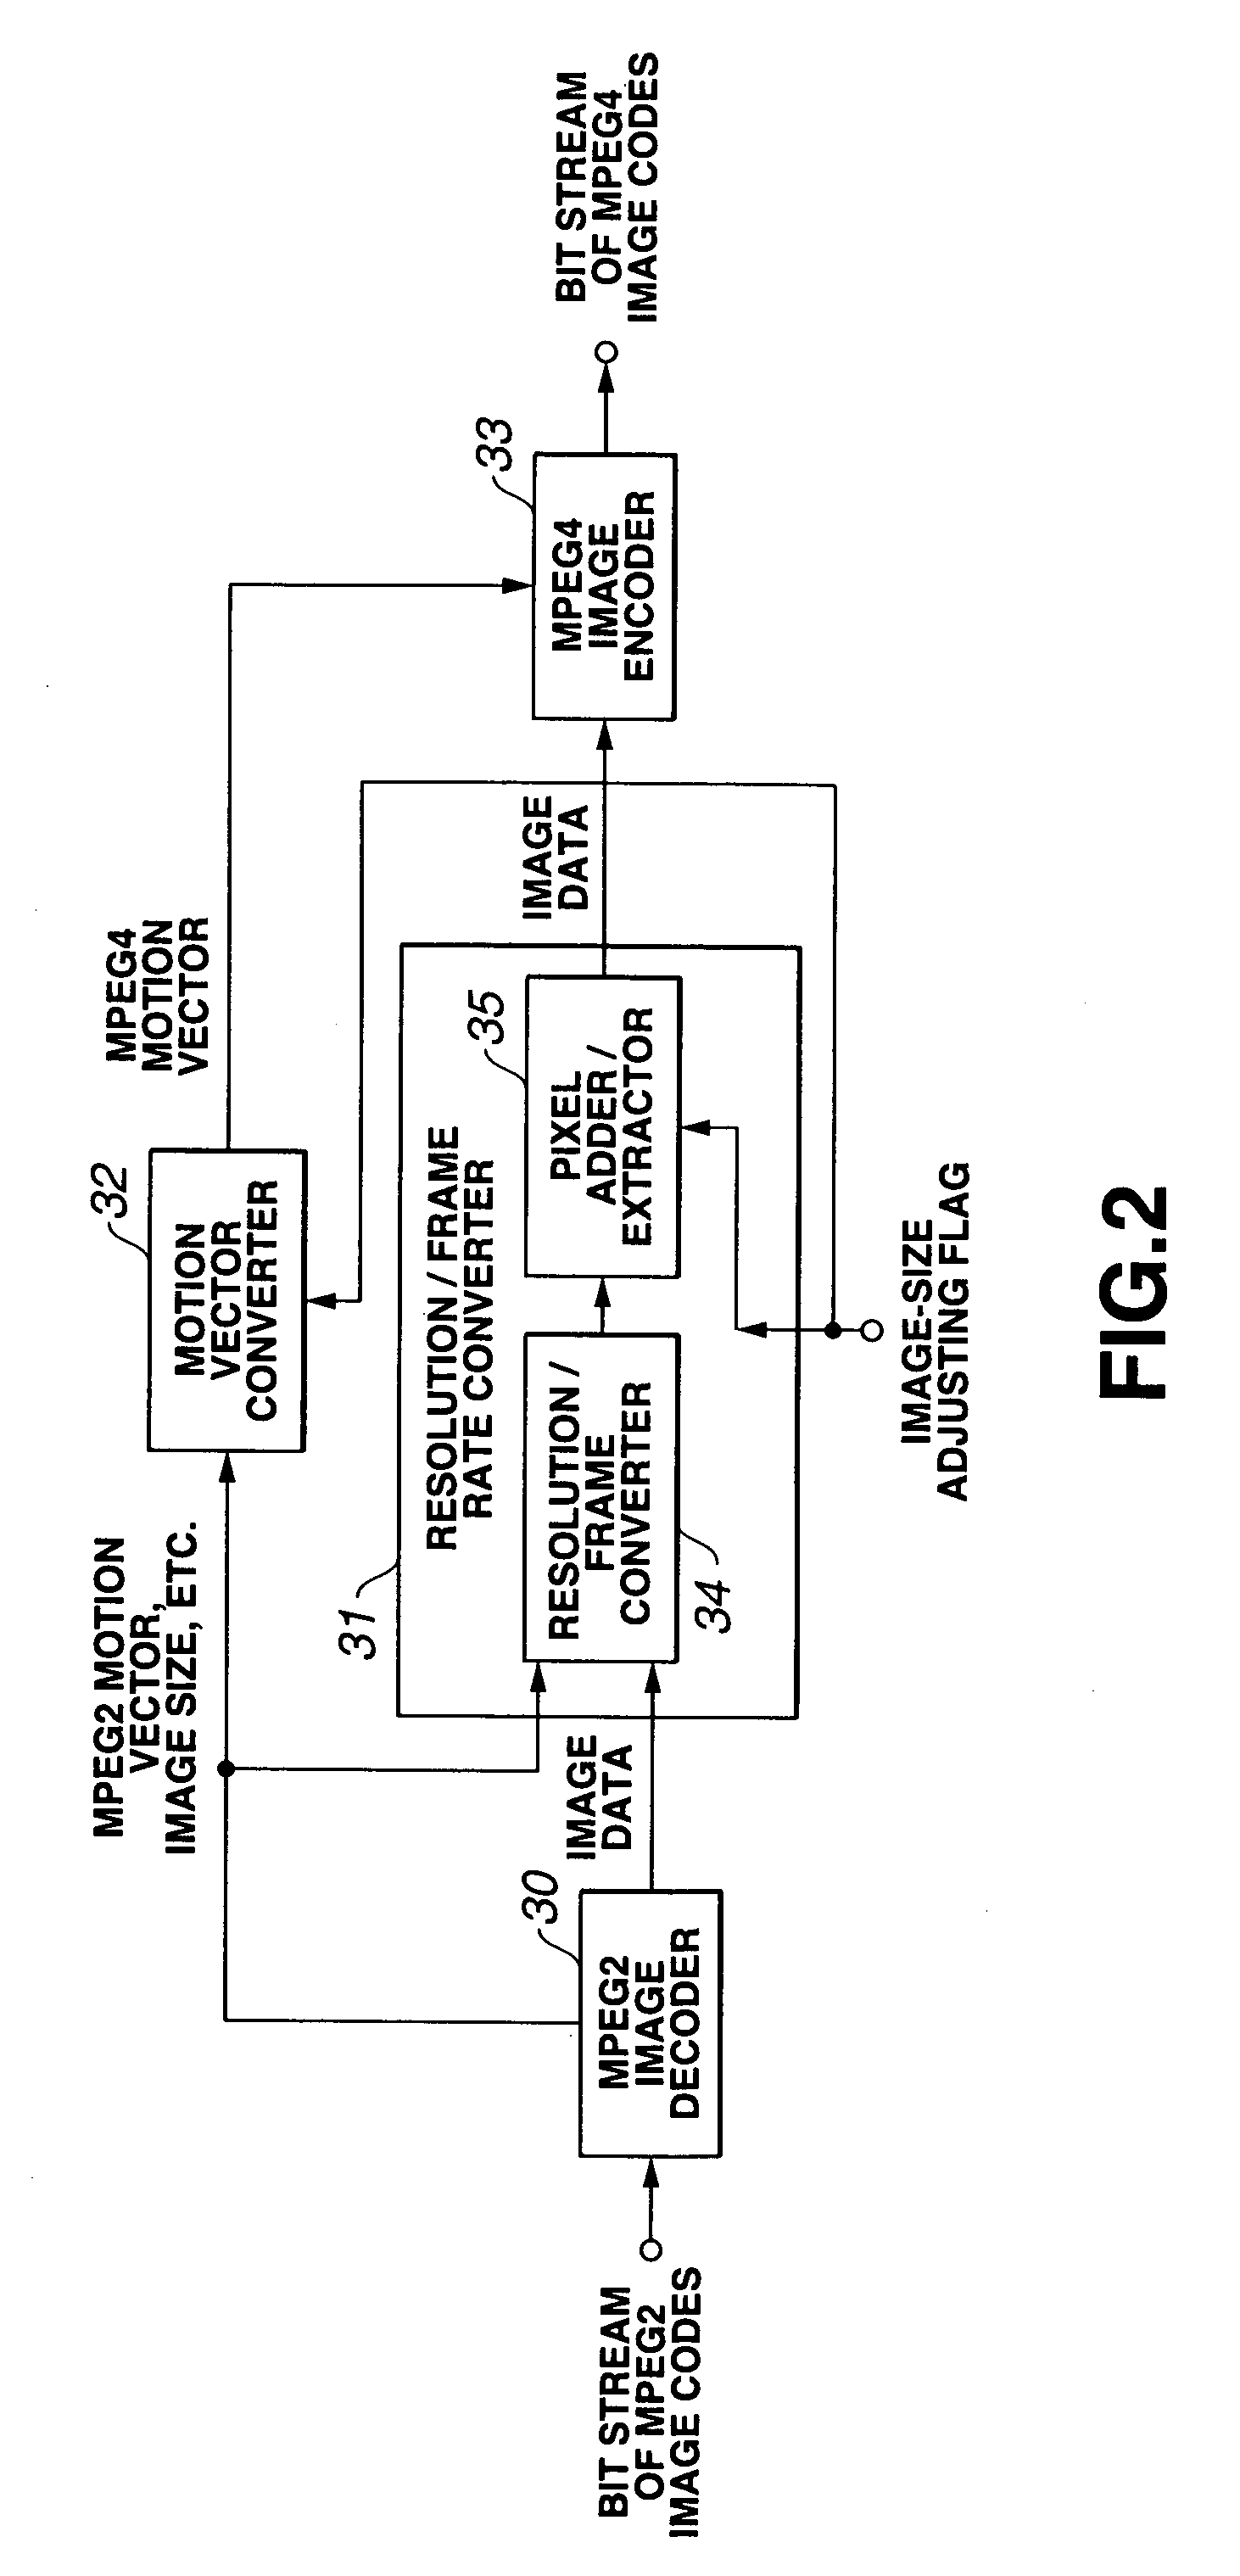 Apparatus and method for converting signals